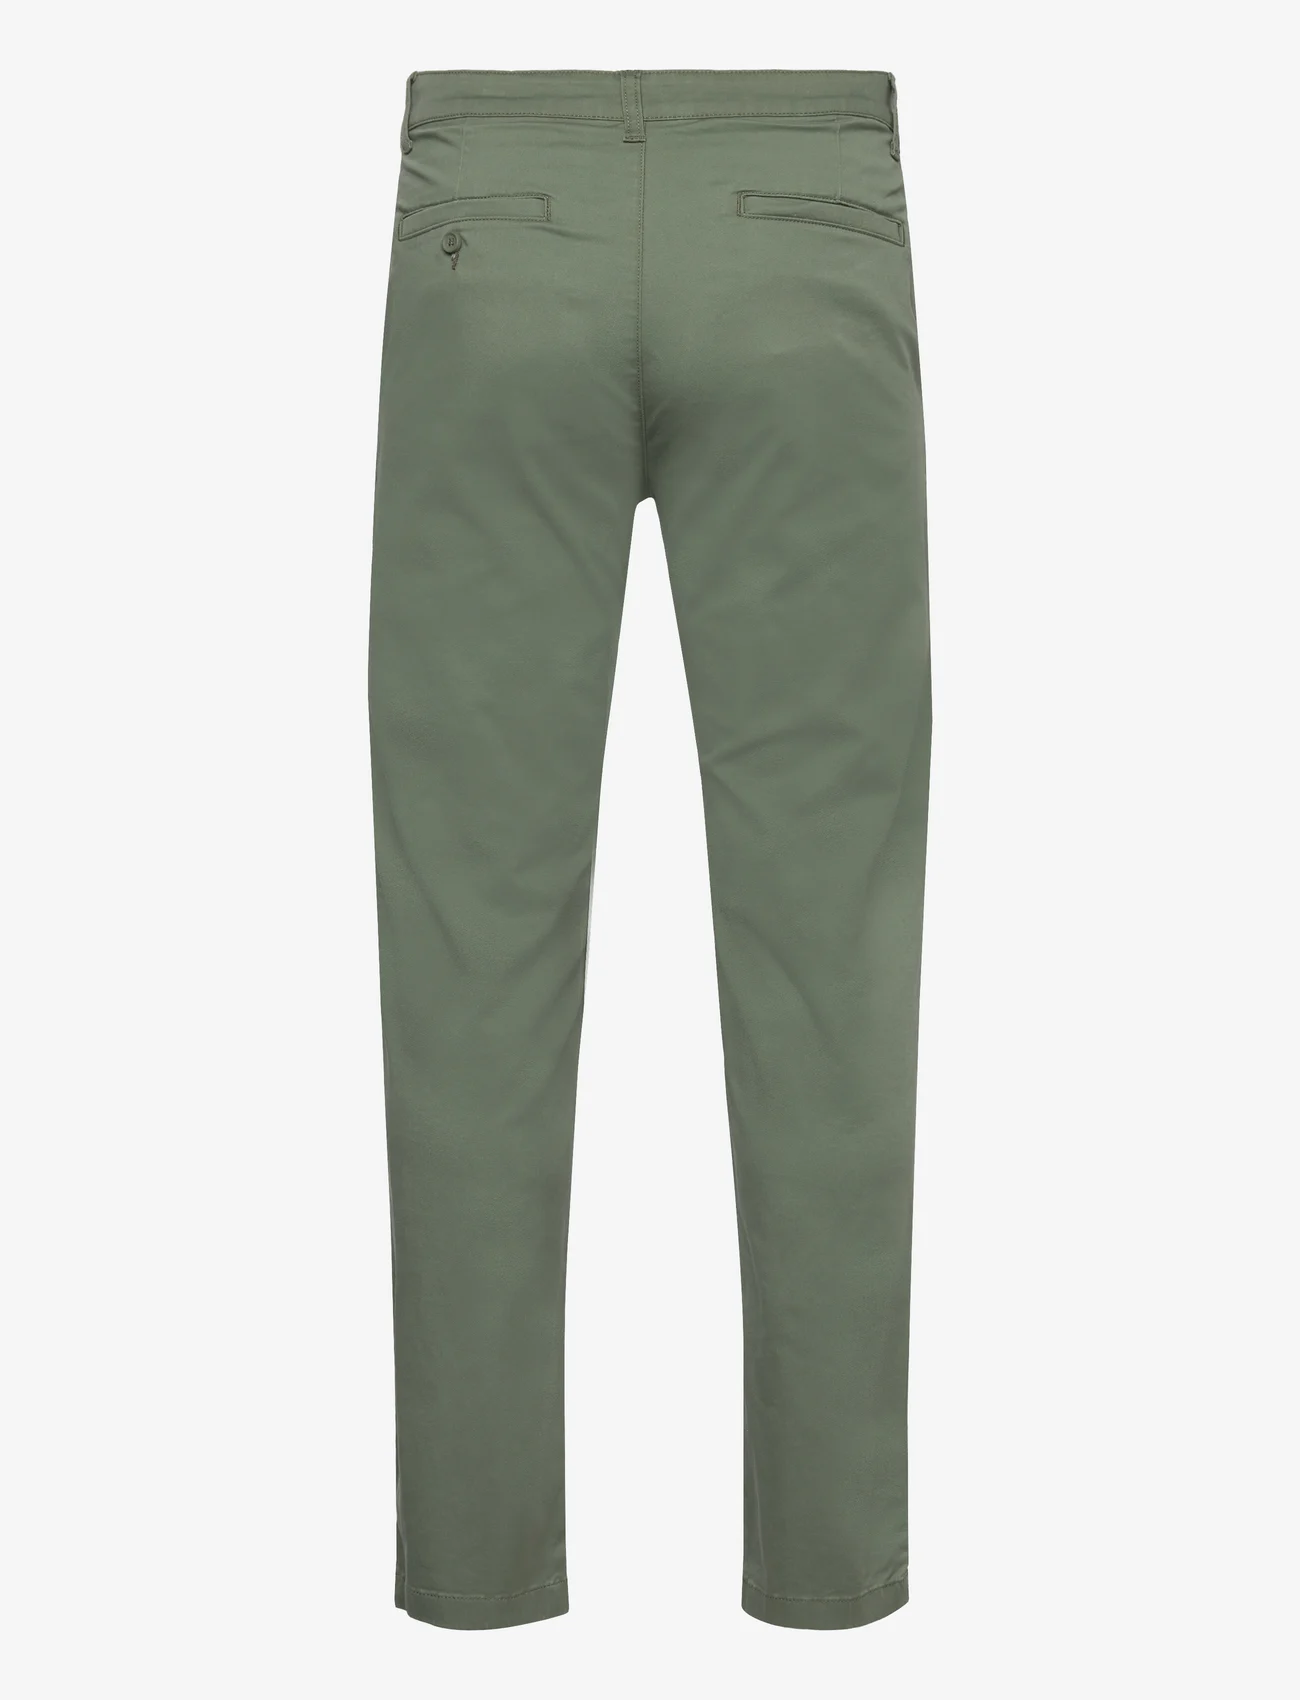 Lee Jeans - REGULAR CHINO SHORT - chinos - olive grove - 1